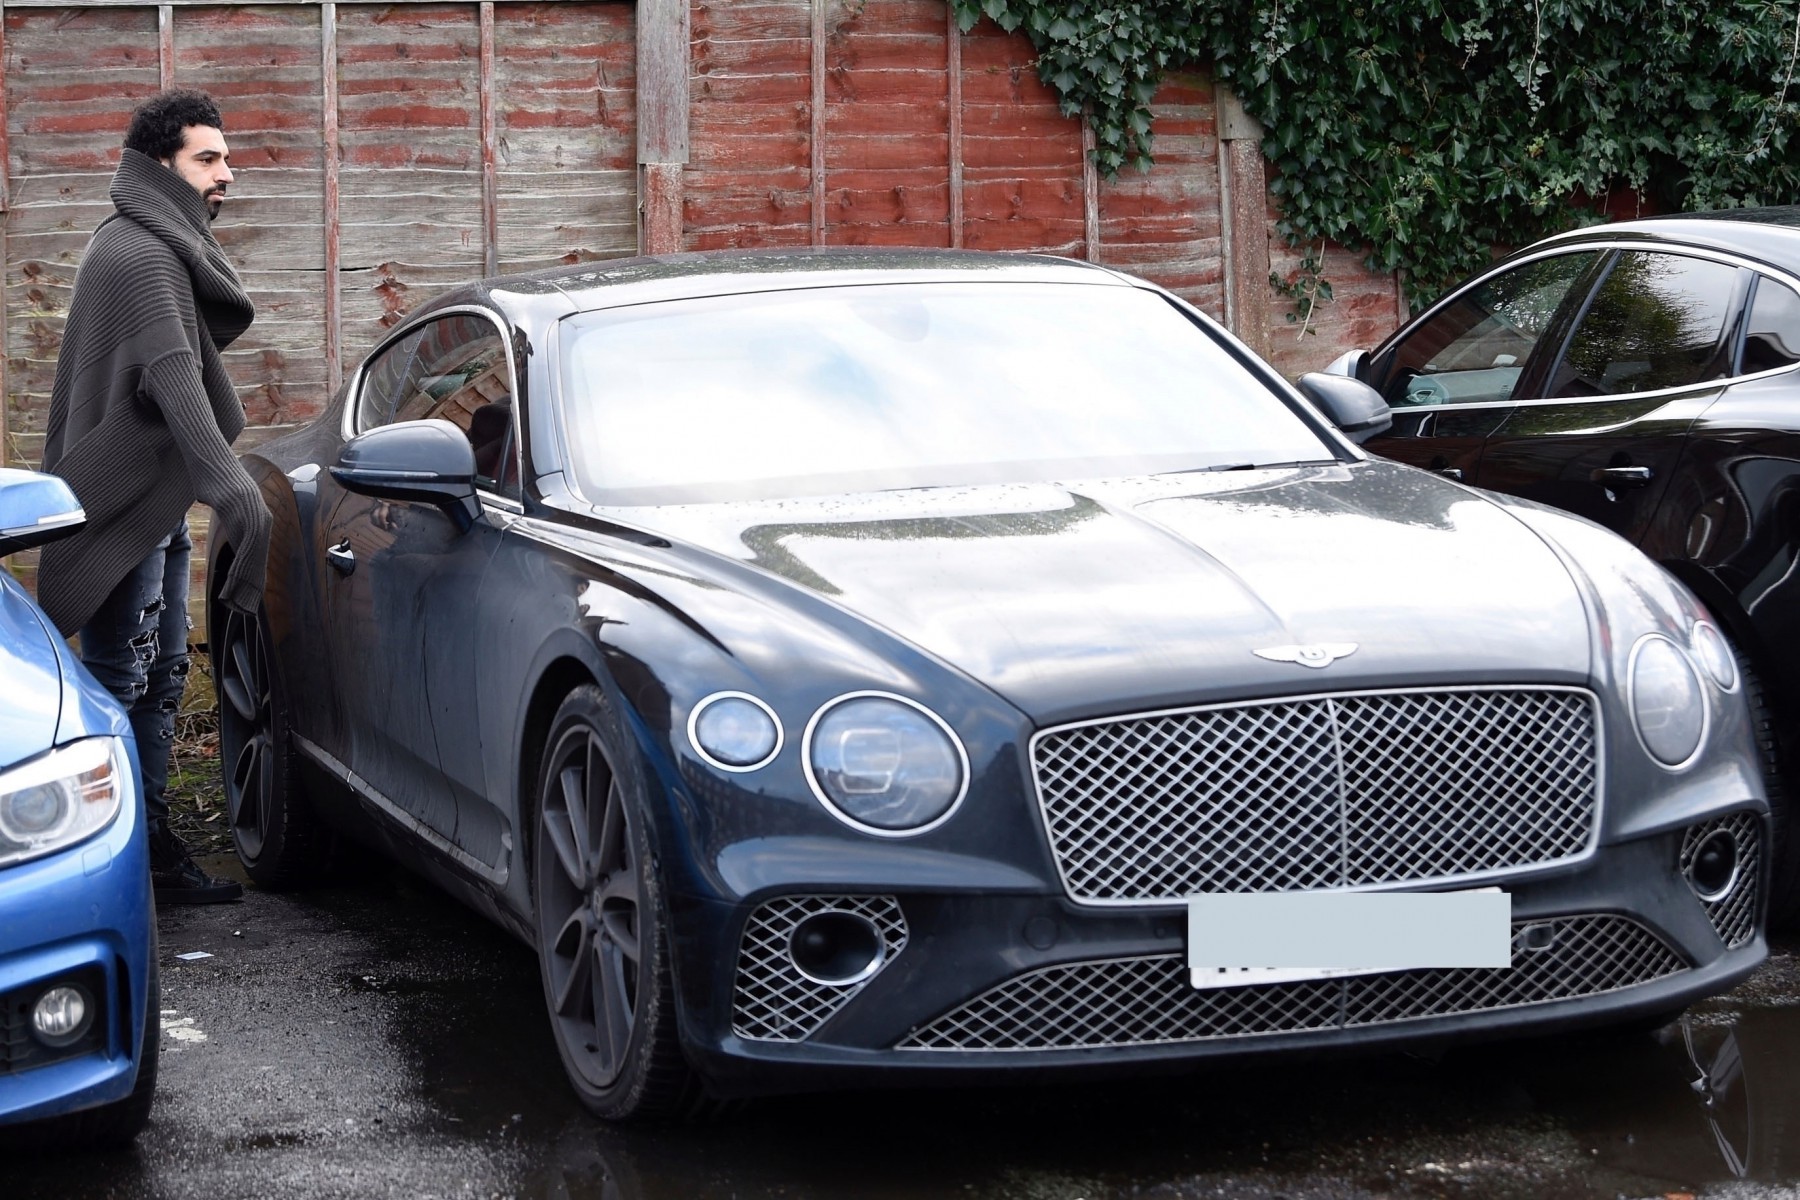 Salah recently added a 160k Bentley Continental GT to his car collection